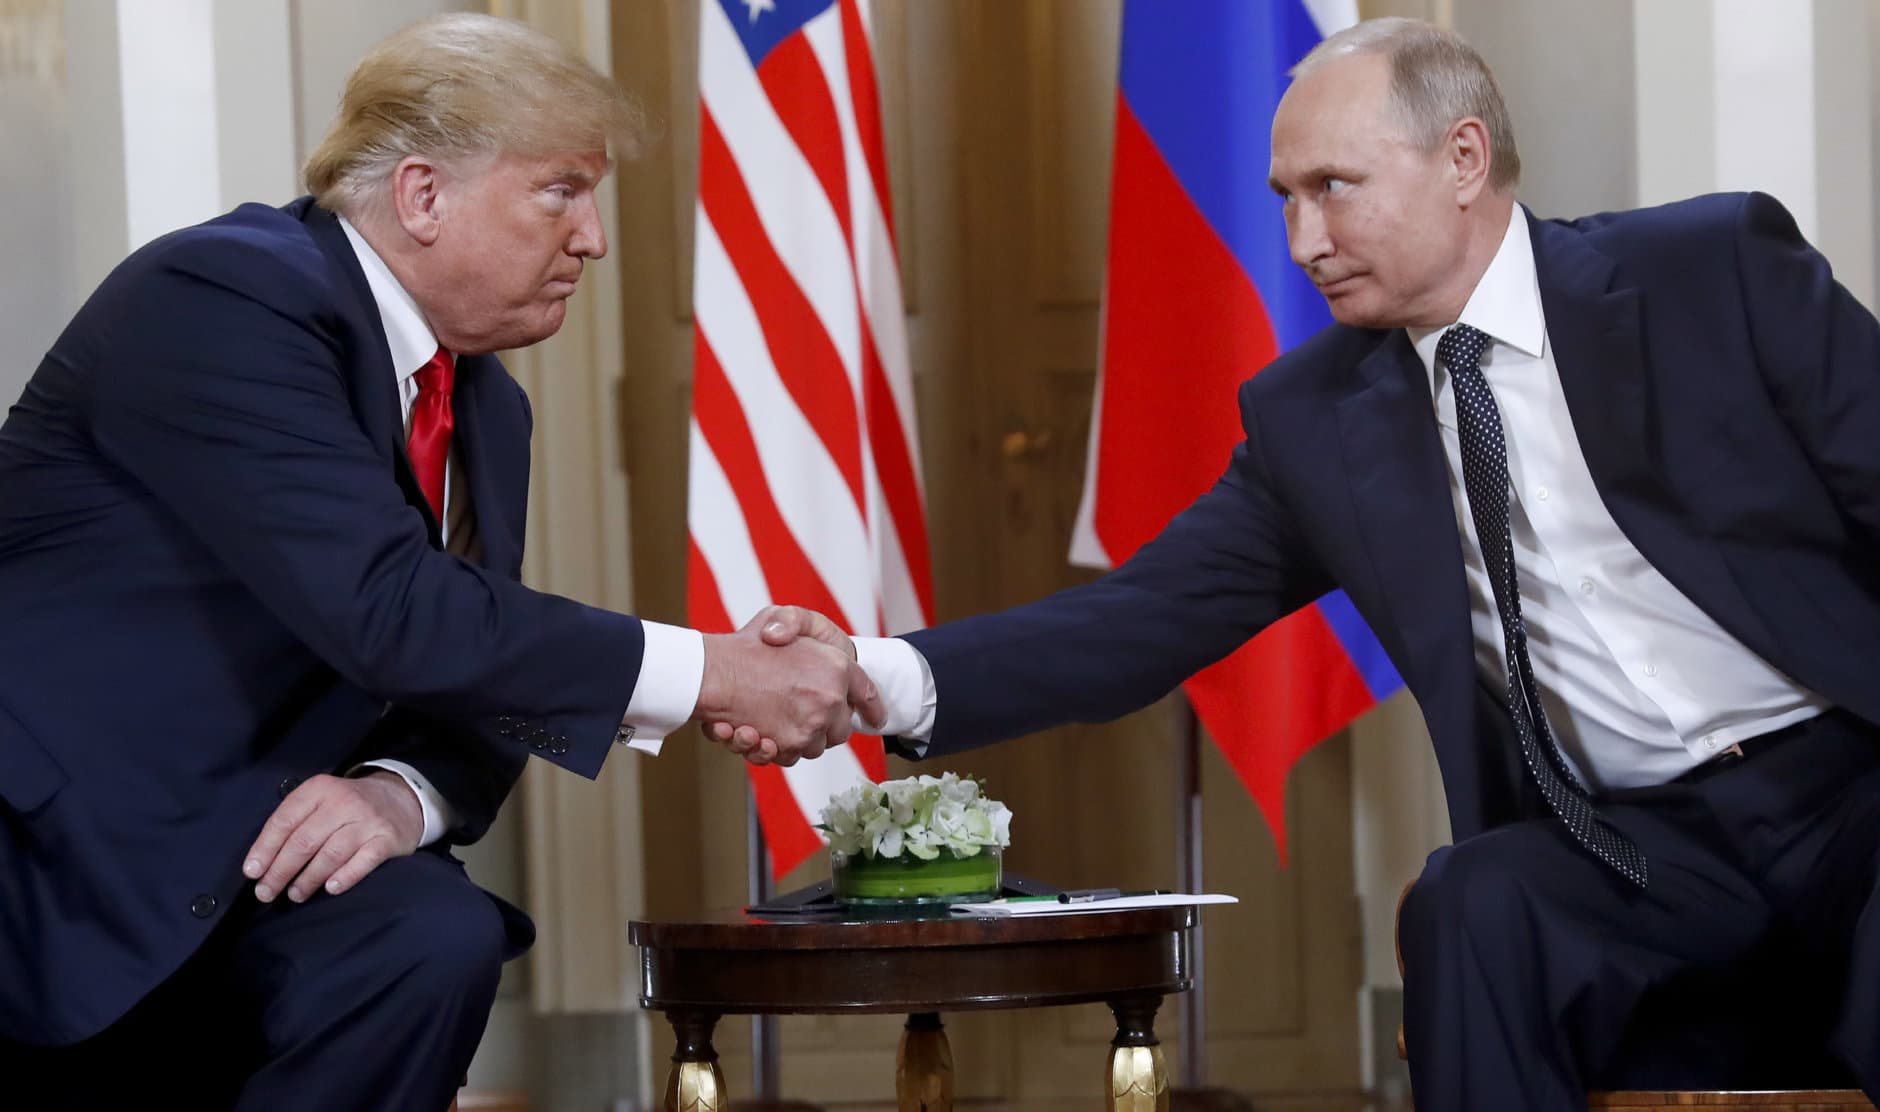 U.S. President Donald Trump, left, and Russian President Vladimir Putin shake hands at the beginning of a meeting at the Presidential Palace in Helsinki, Finland, on July 16, 2018. (AP Photo/Pablo Martinez Monsivais)